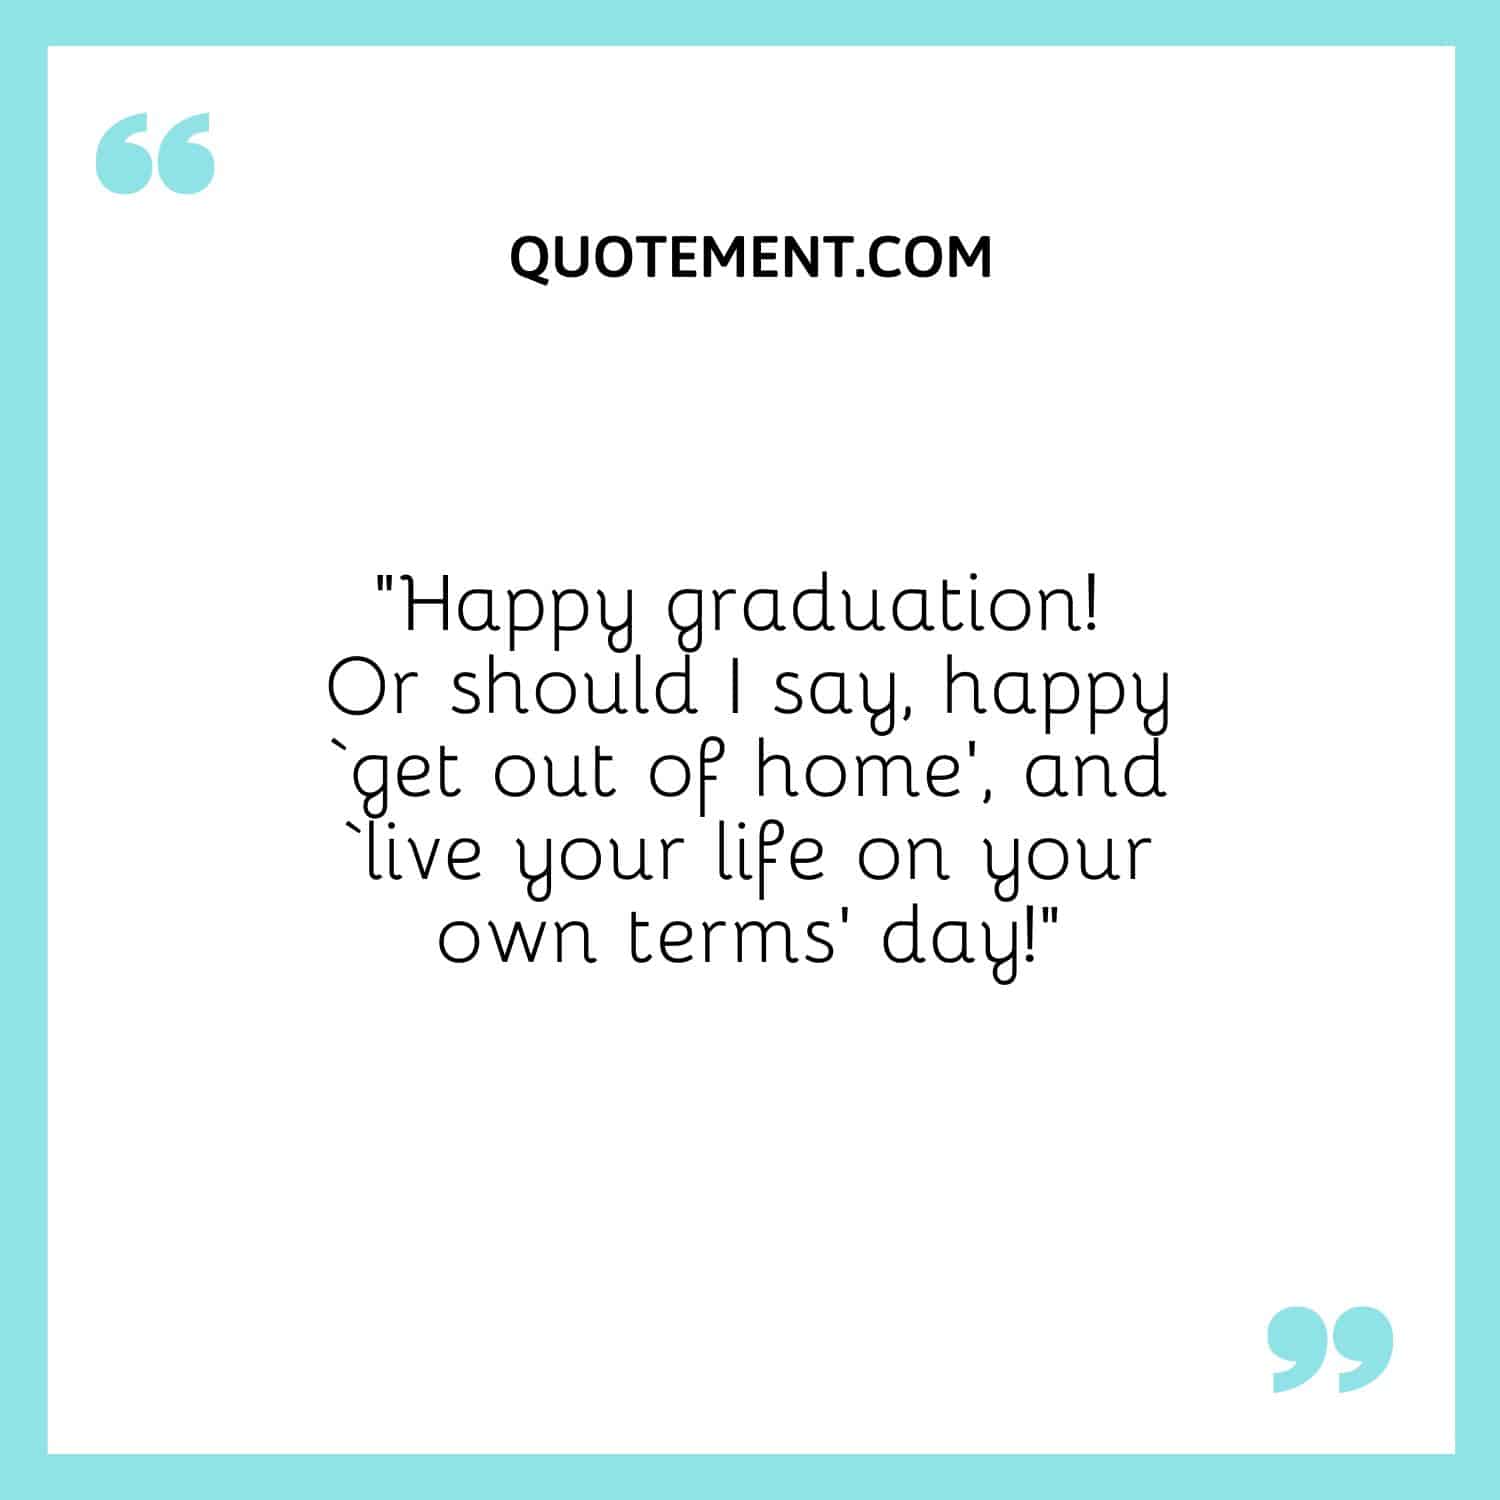 “Happy graduation! Or should I say, happy ‘get out of home’, and ‘live your life on your own terms’ day!”